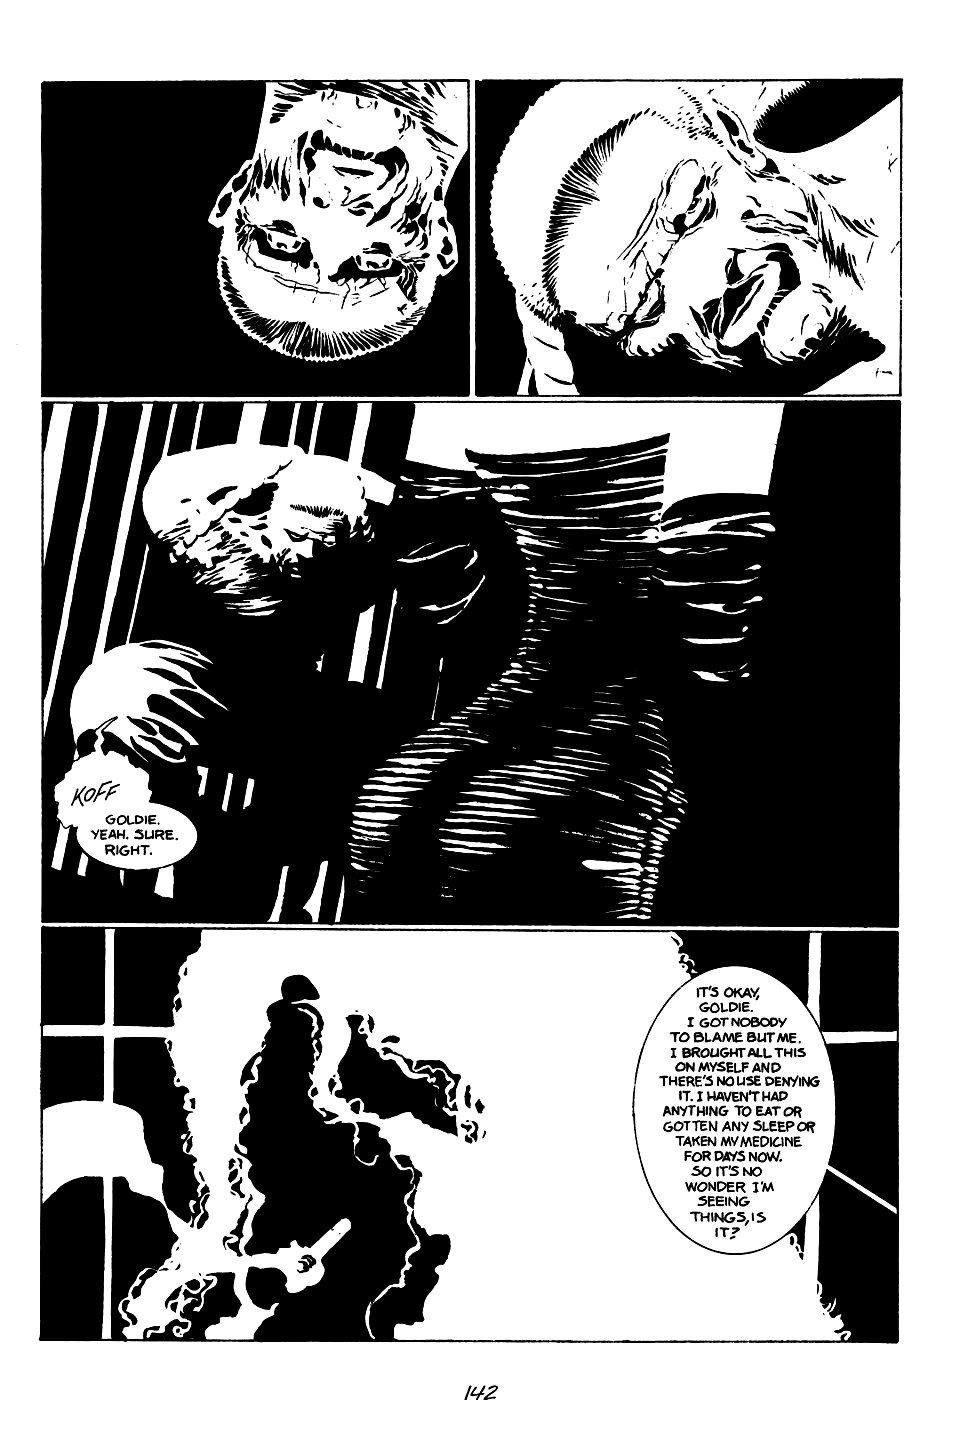 page 142 of sin city 1 the hard goodbye